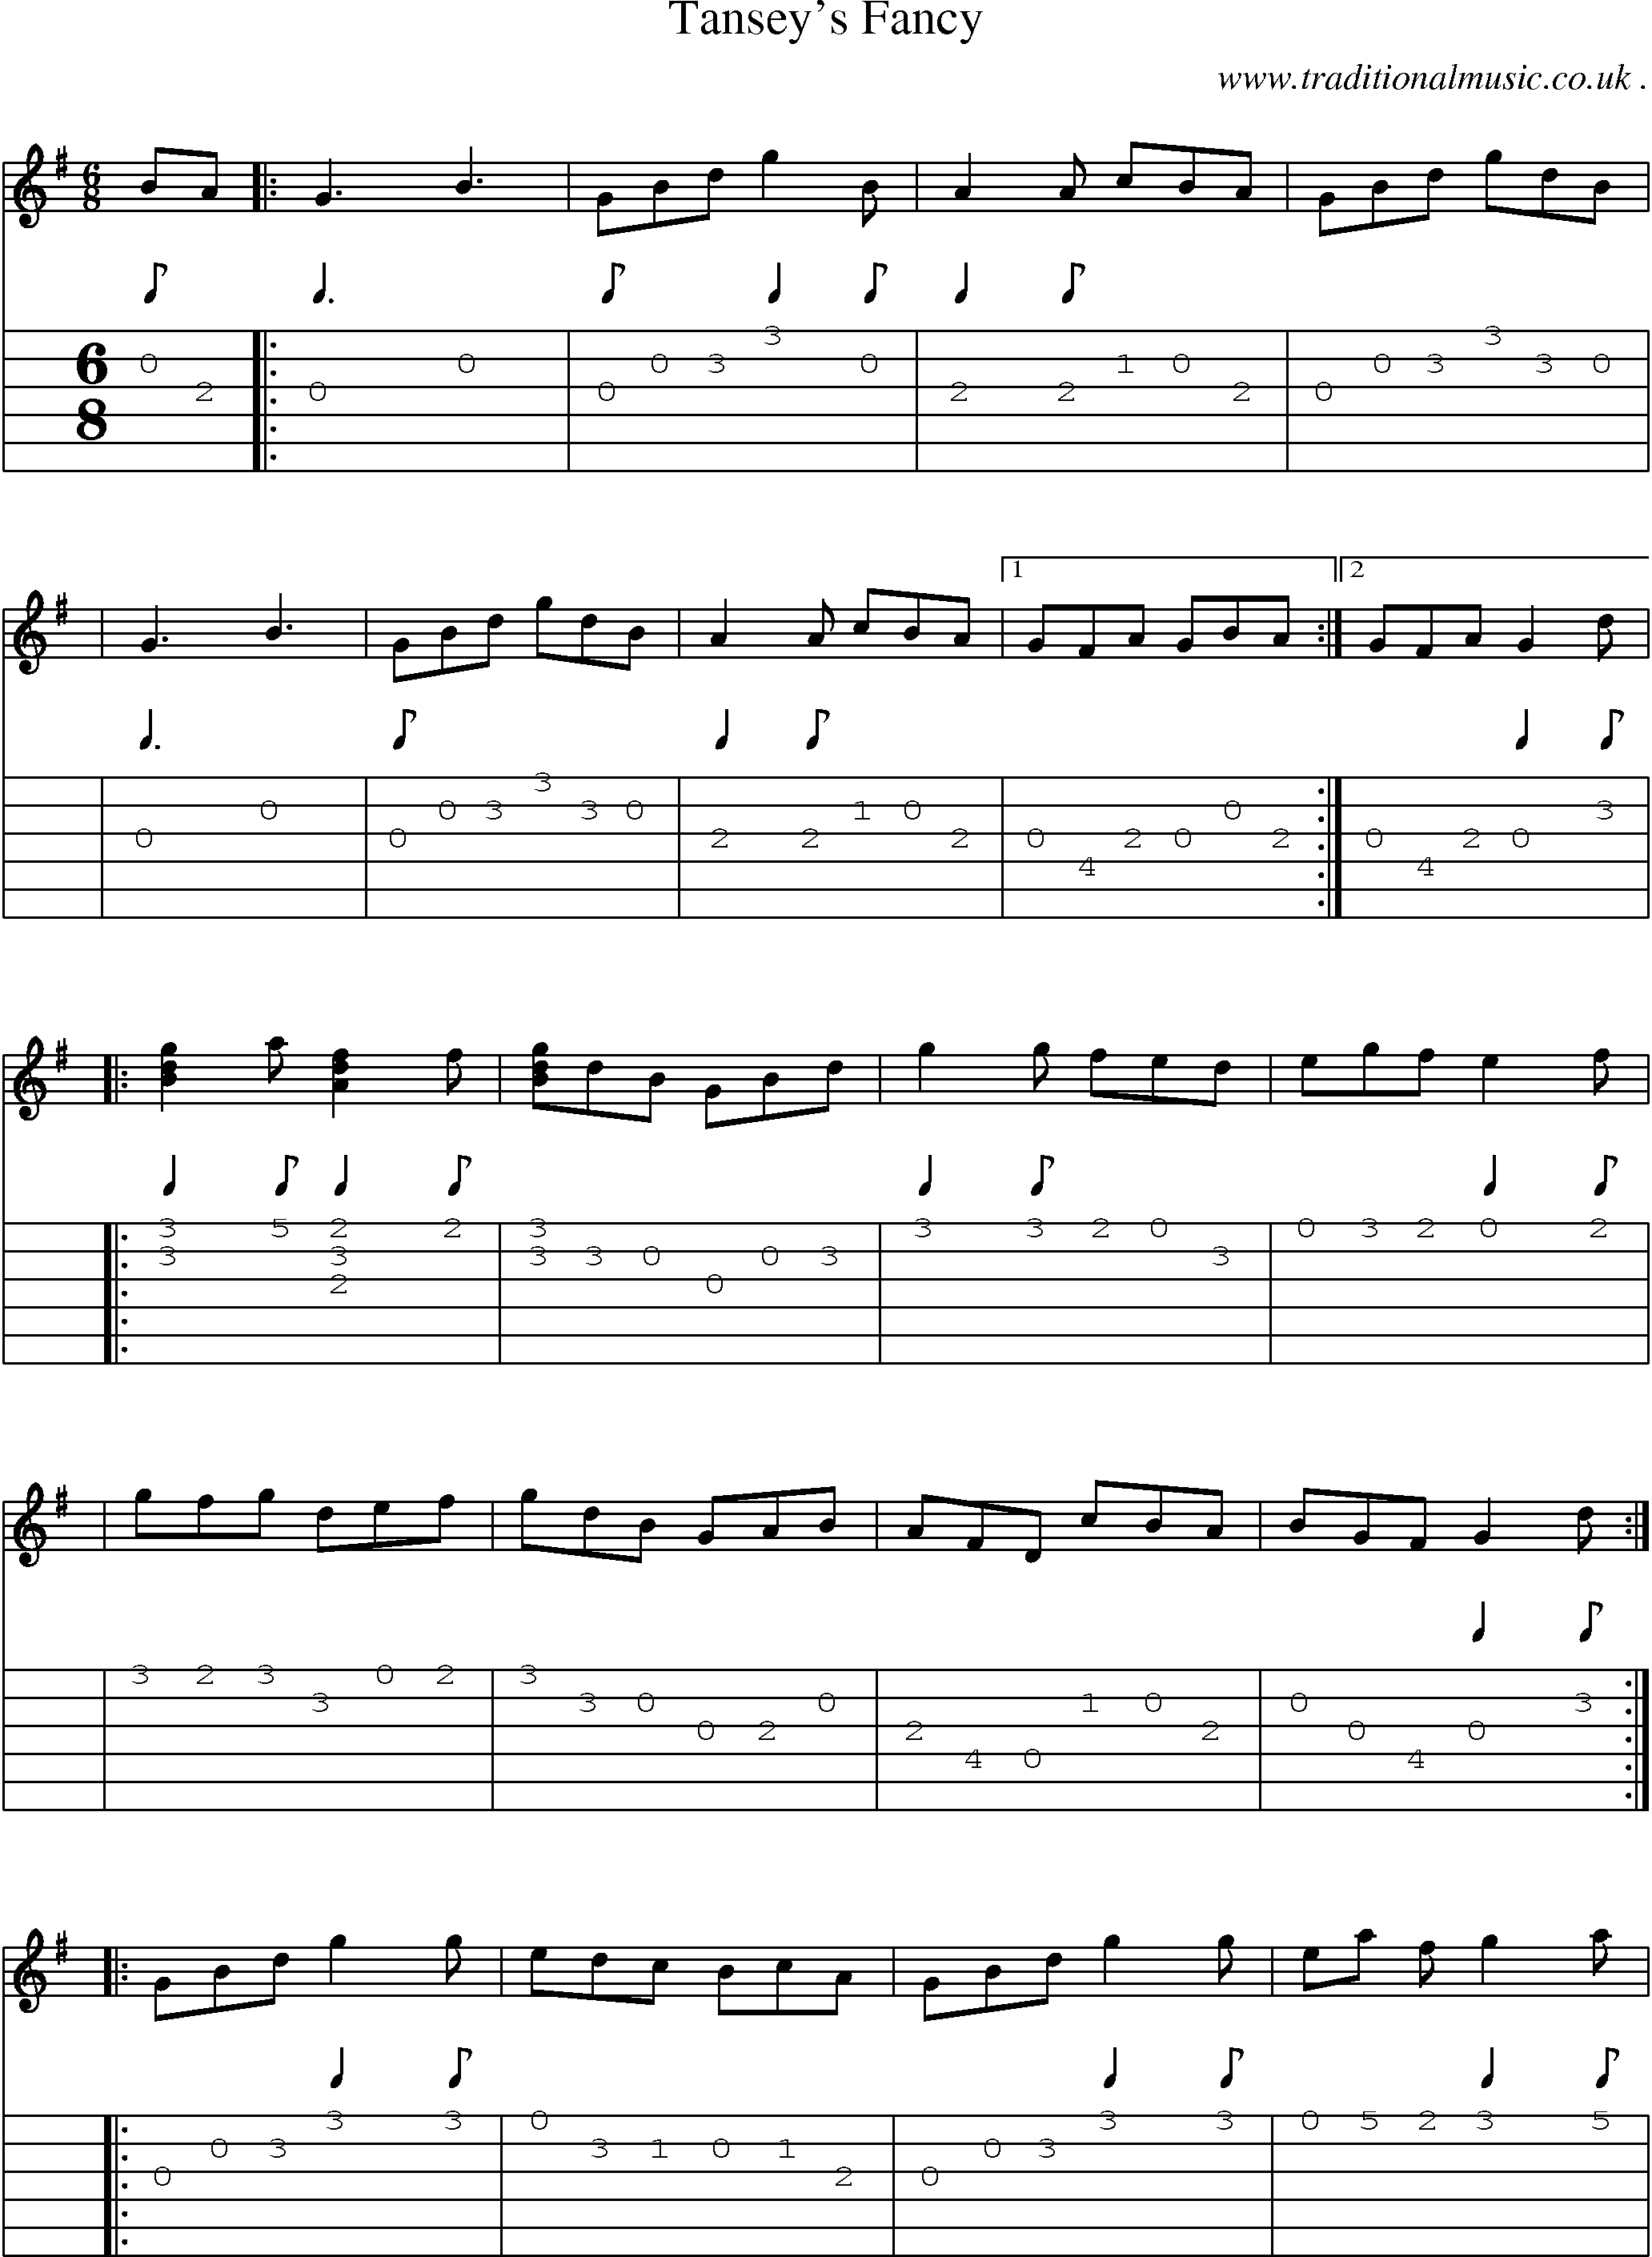 Sheet-Music and Guitar Tabs for Tanseys Fancy